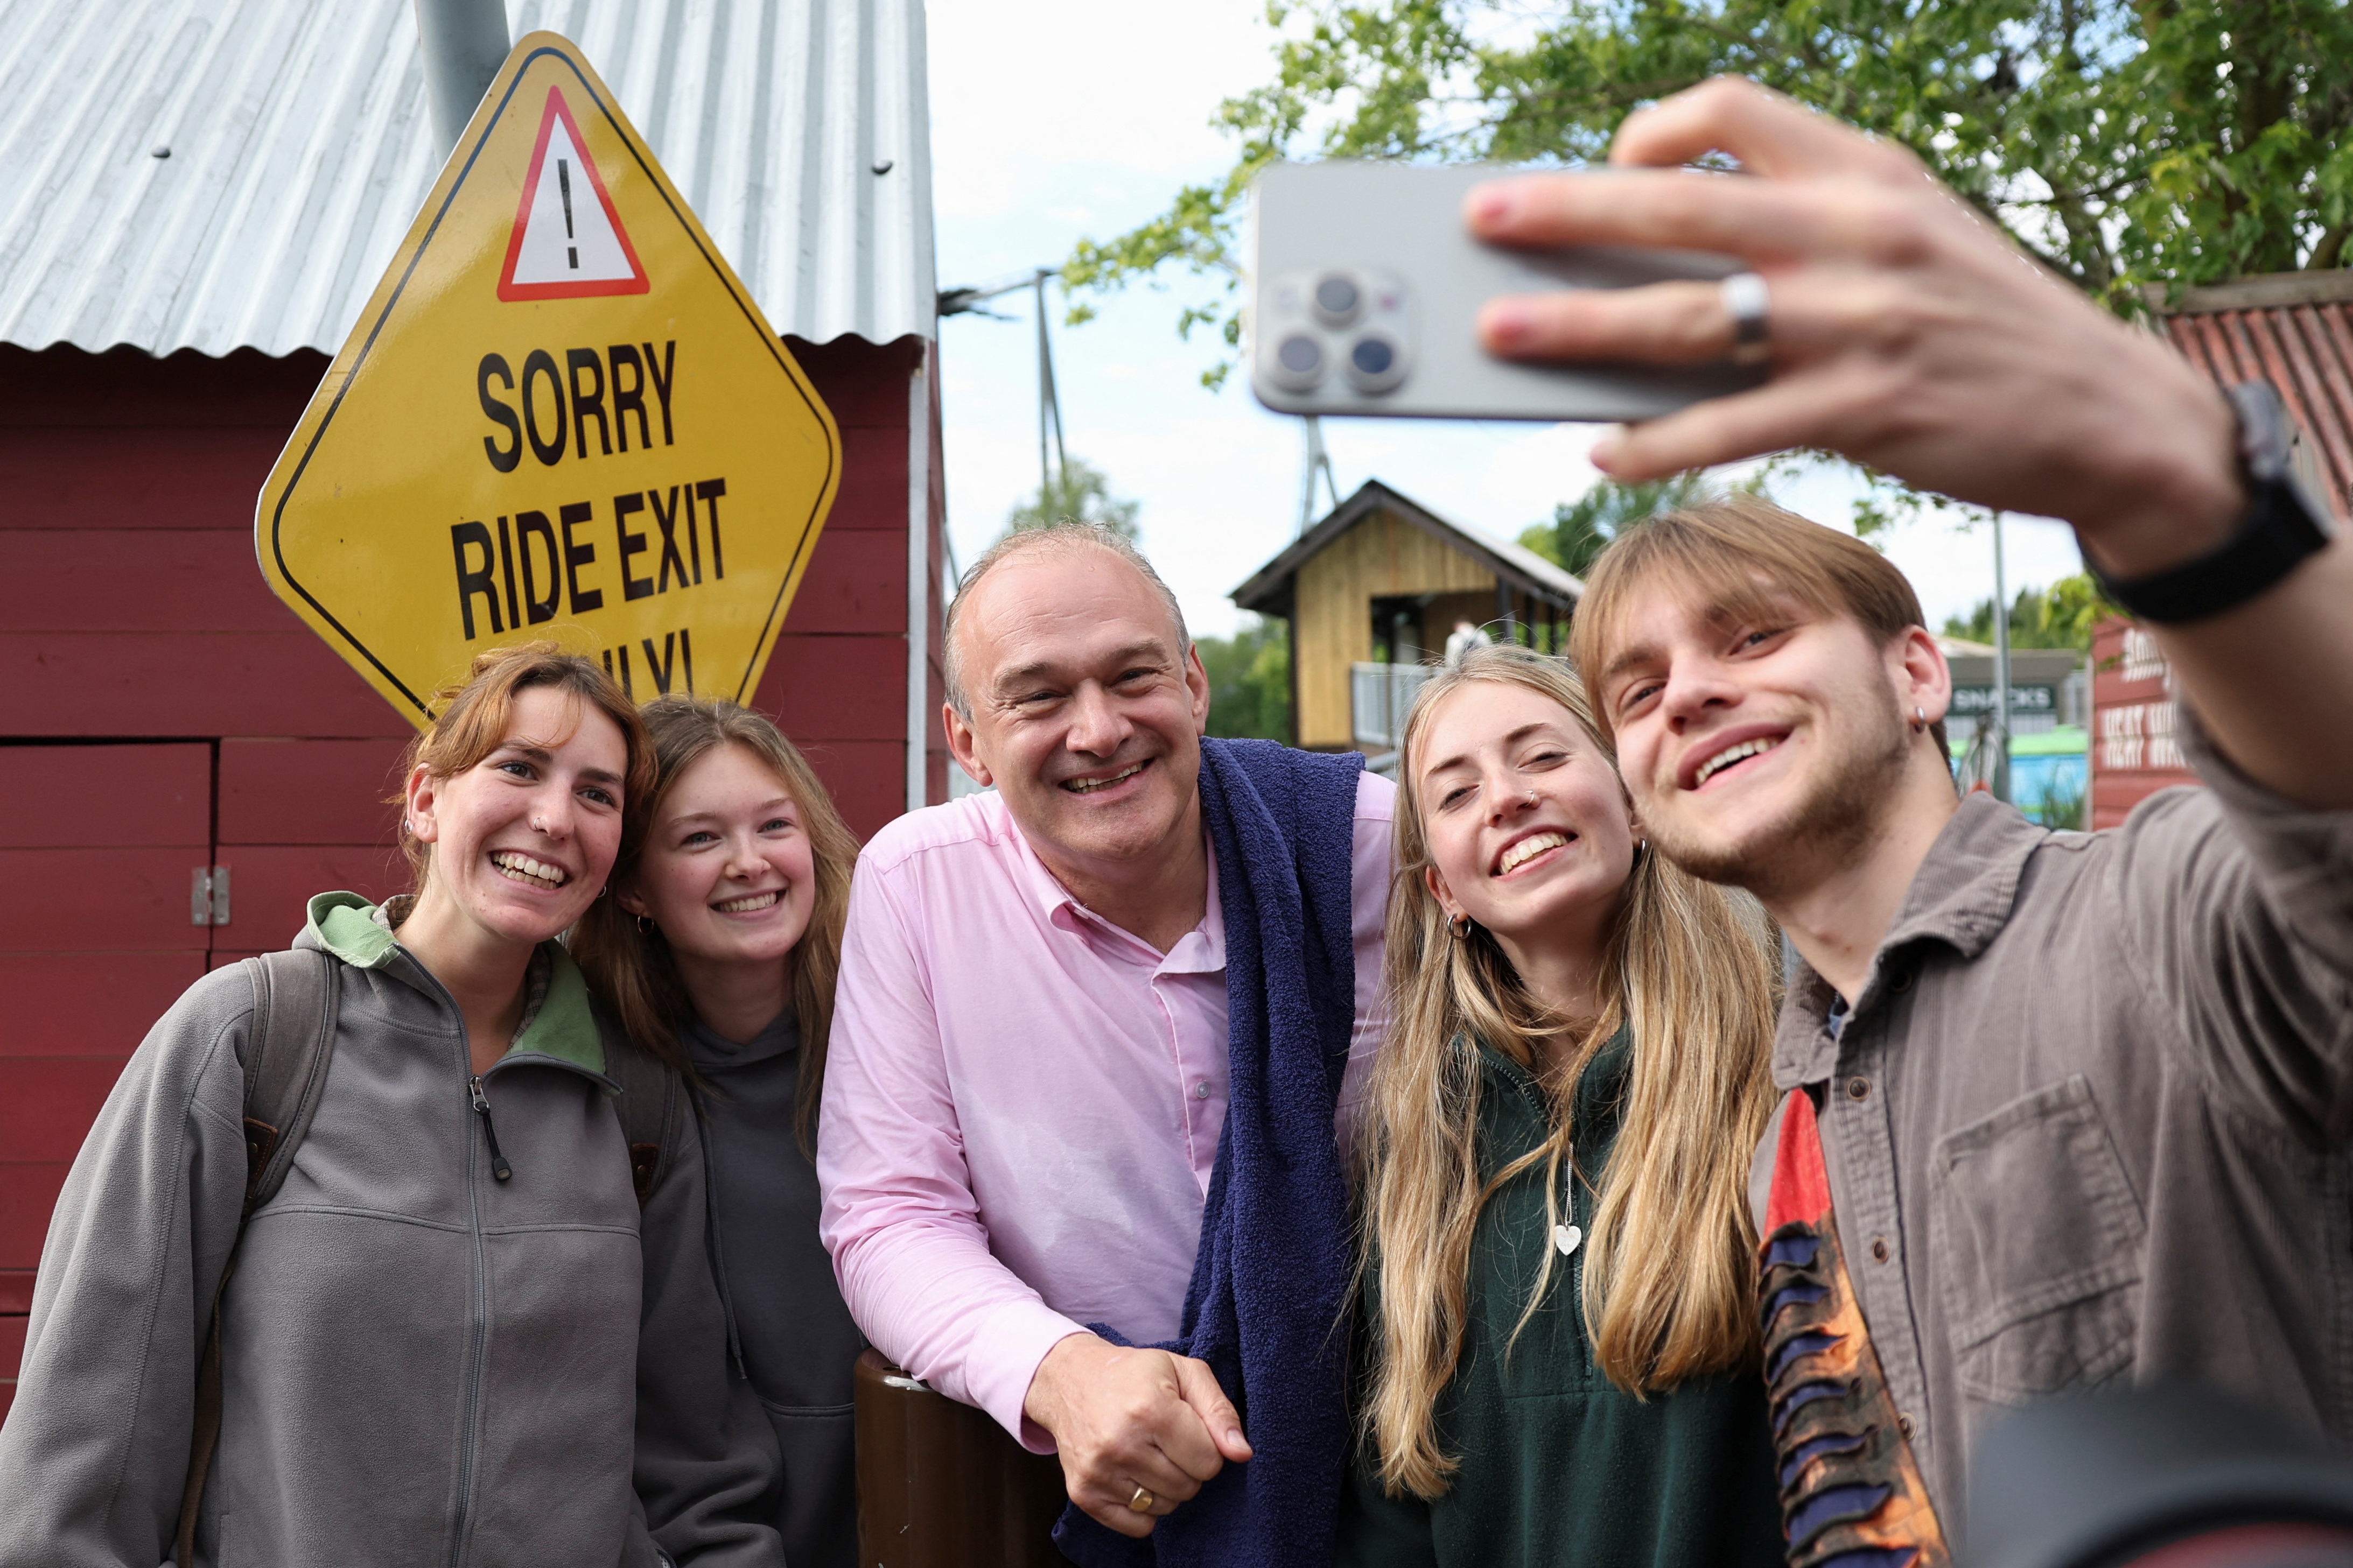 Liberal Democrat party leader Ed Davey poses for a selfie at Thorpe Park theme park. /Suzanne Plunkett/Reuters